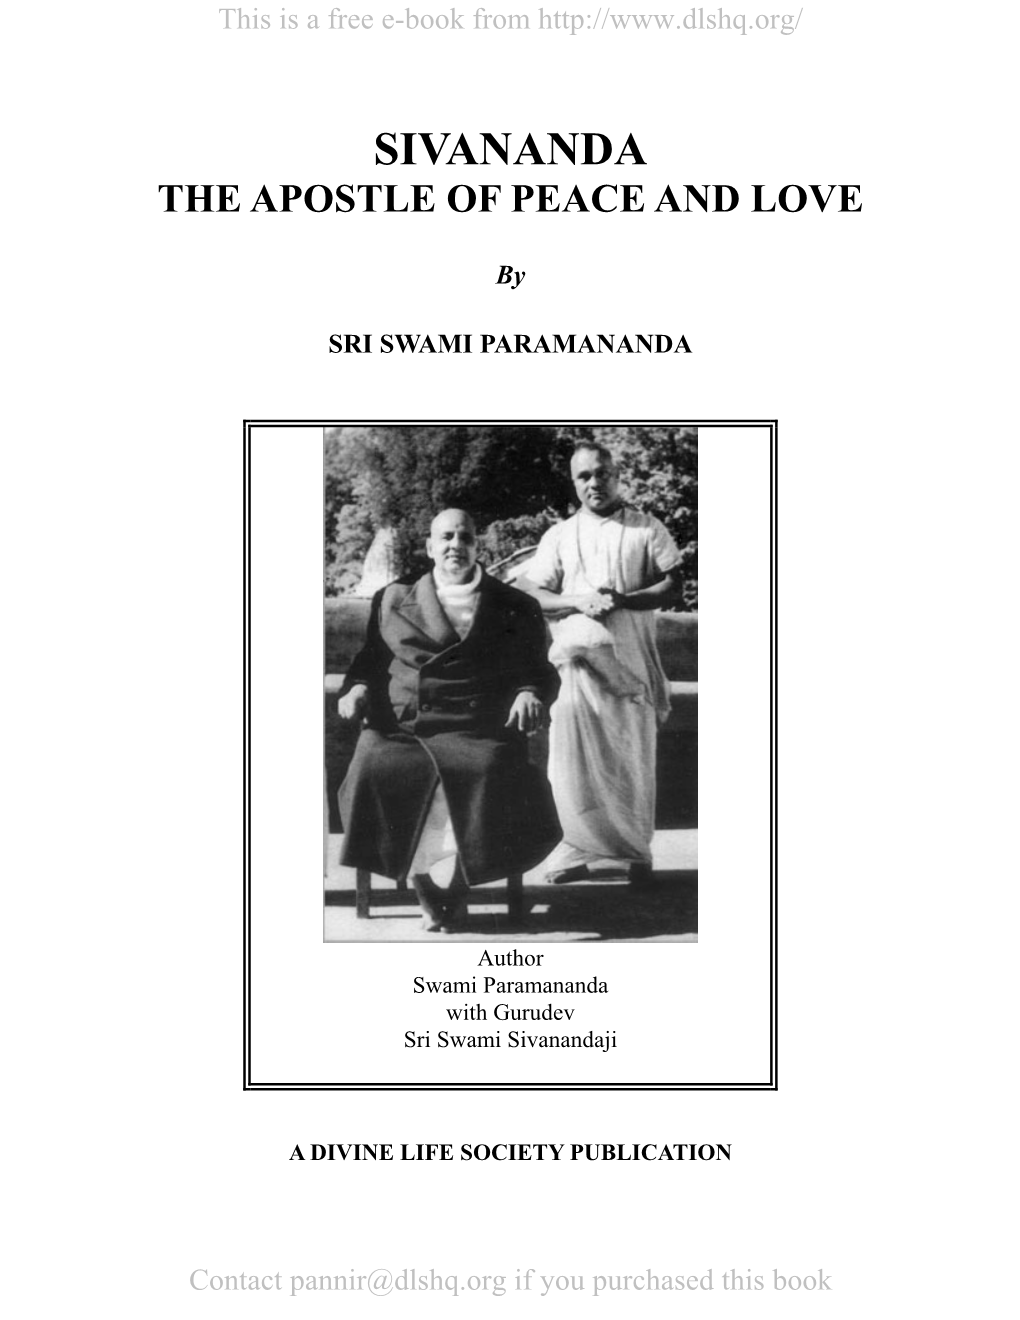 The Apostle of Peace and Love